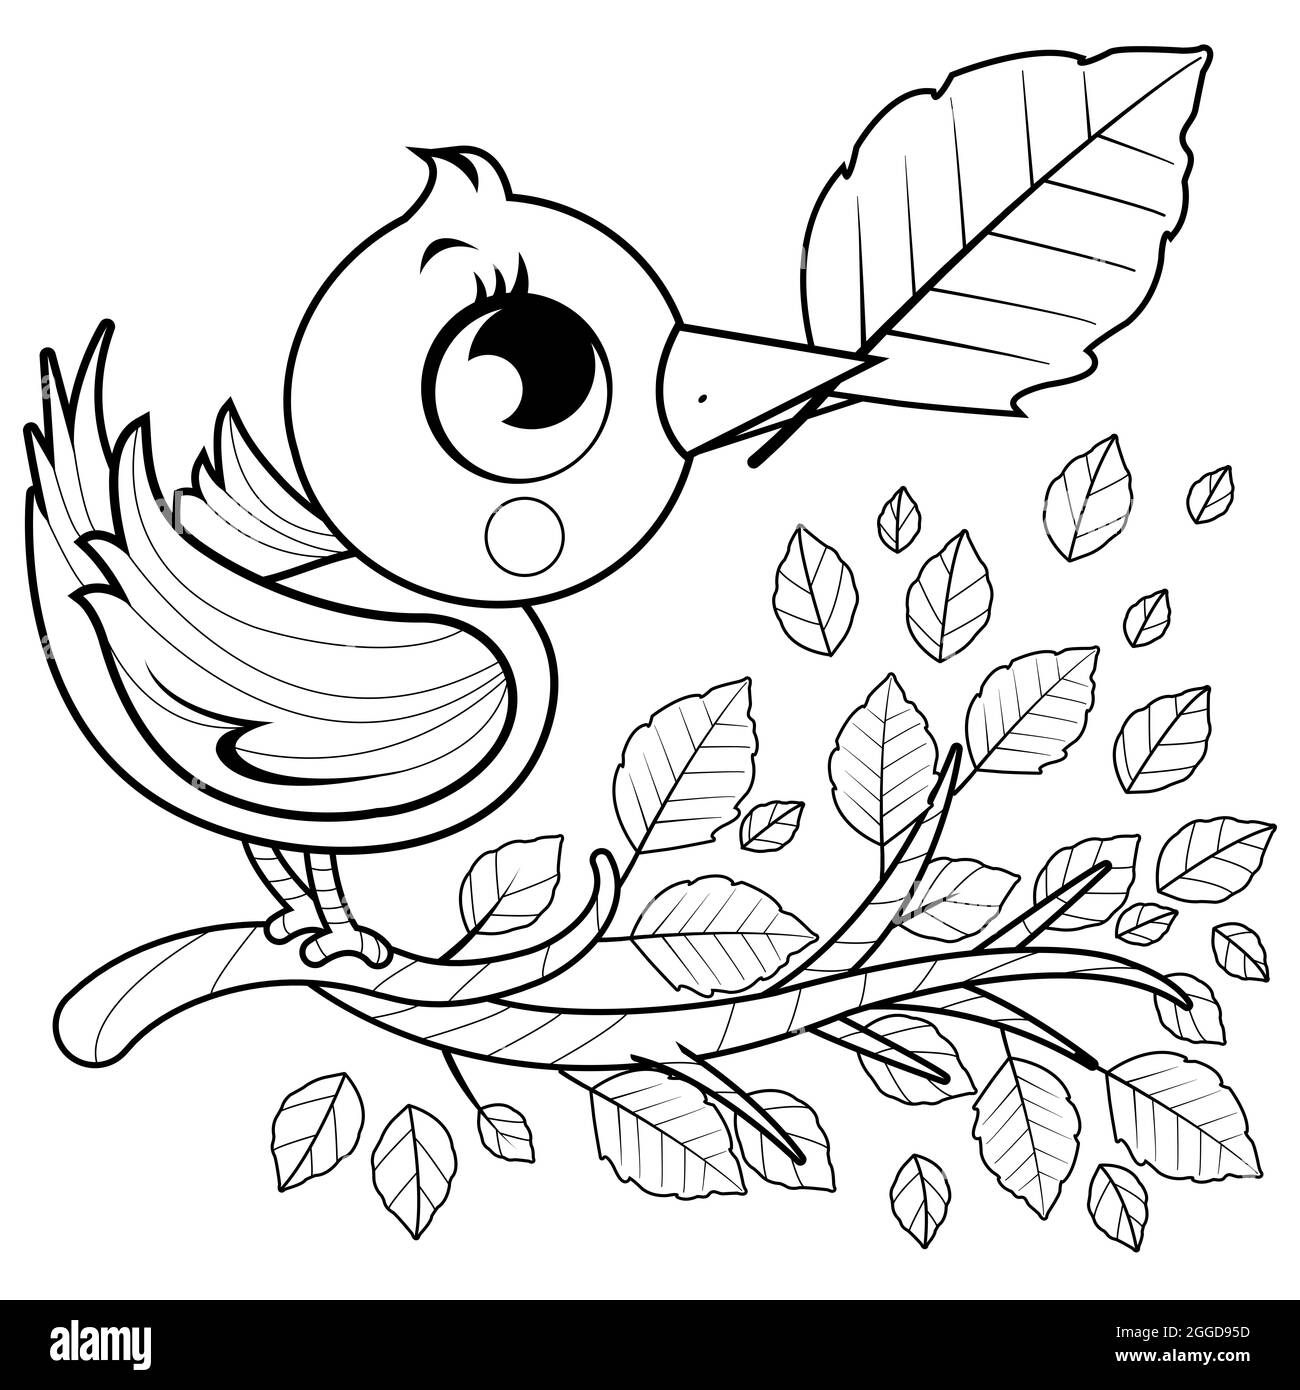 Bird on a branch with leaves. Black and white coloring page. Stock Photo